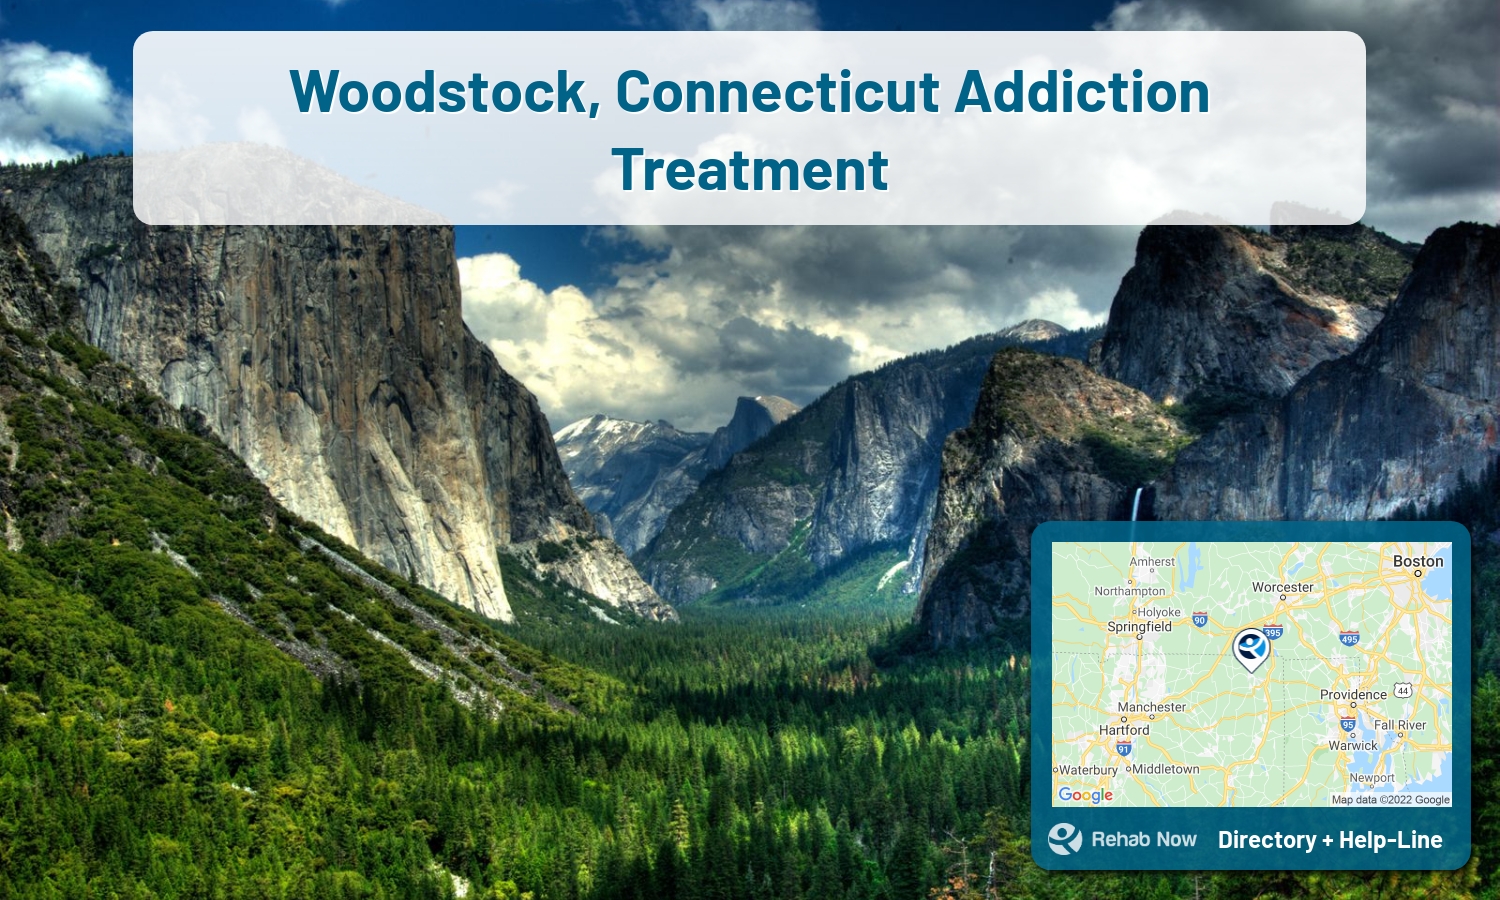 Woodstock, CT Treatment Centers. Find drug rehab in Woodstock, Connecticut, or detox and treatment programs. Get the right help now!